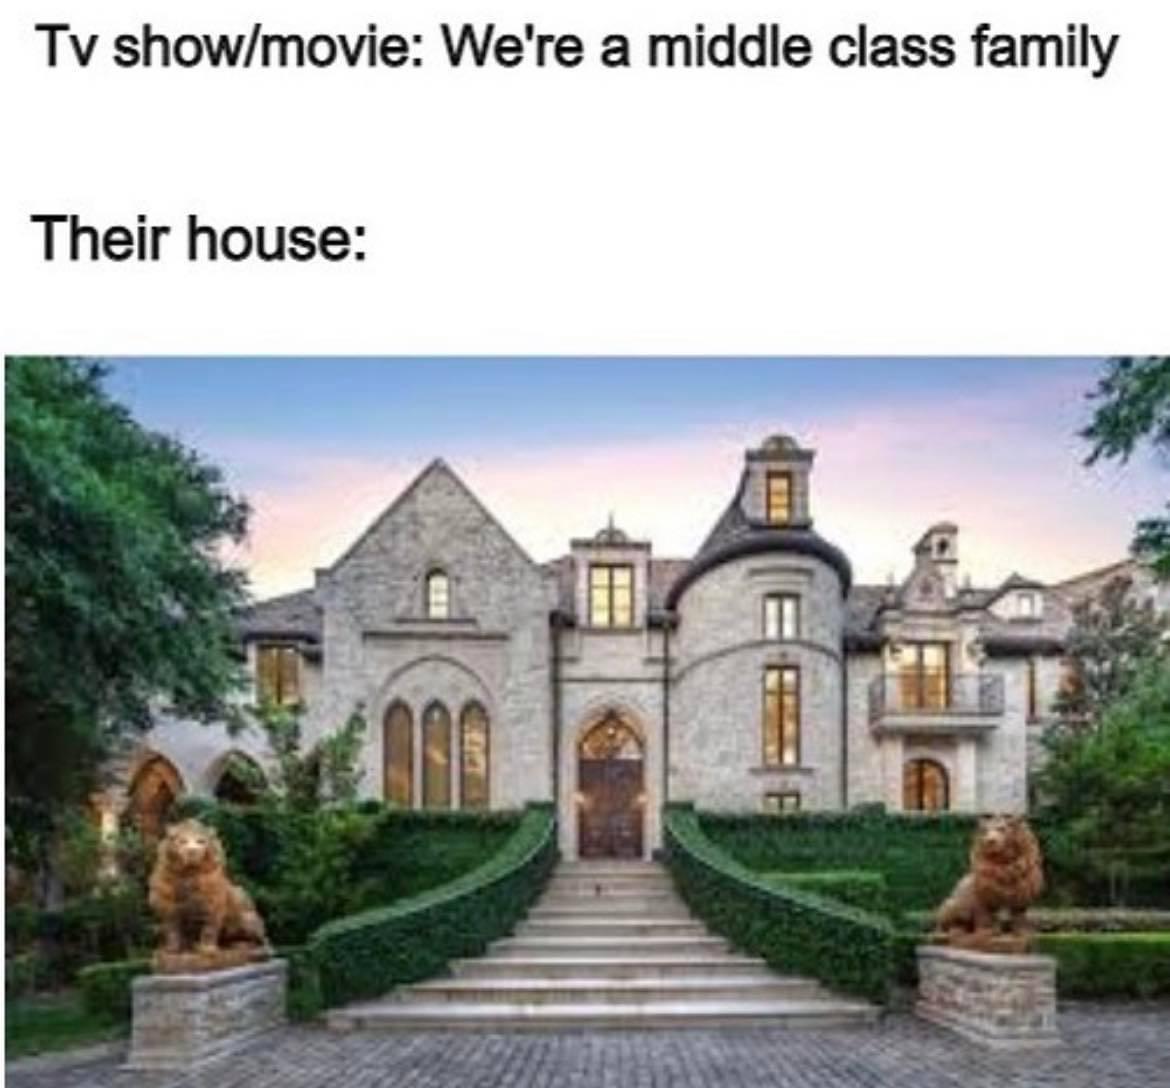 Movie memes - m mansion north dallas - Tv showmovie We're a middle class family Their house Eee